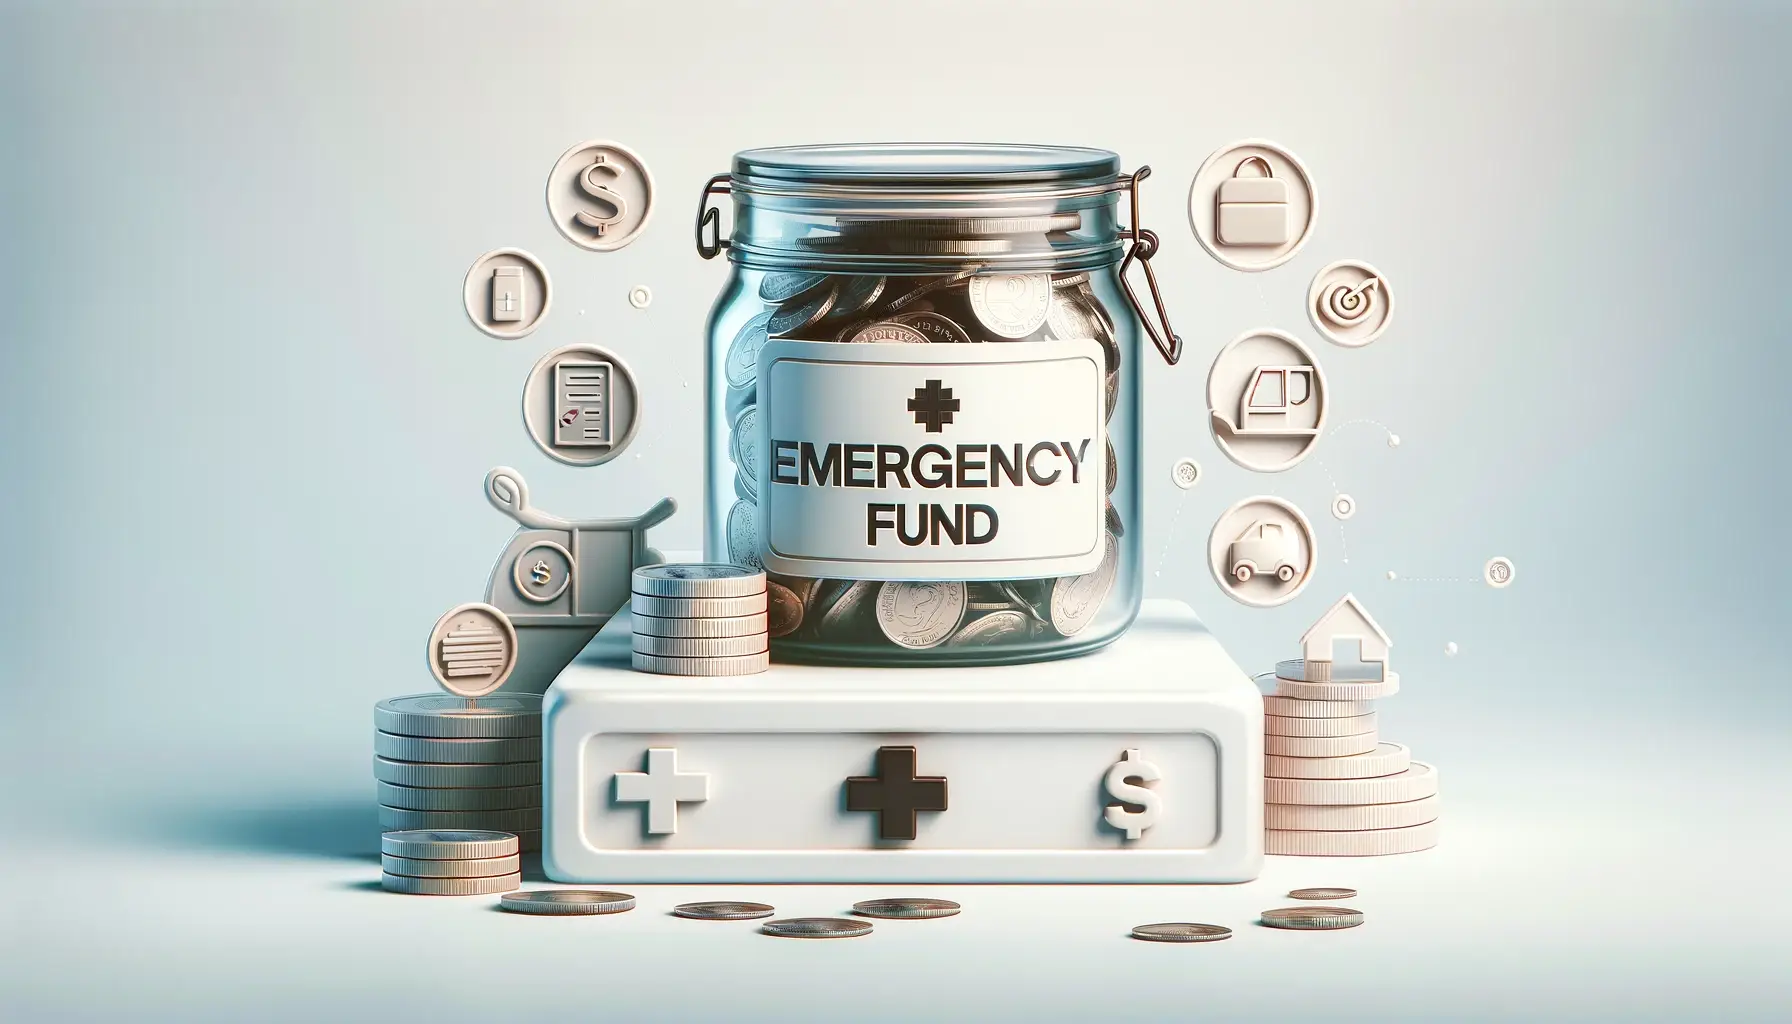 What is Emergency Fund